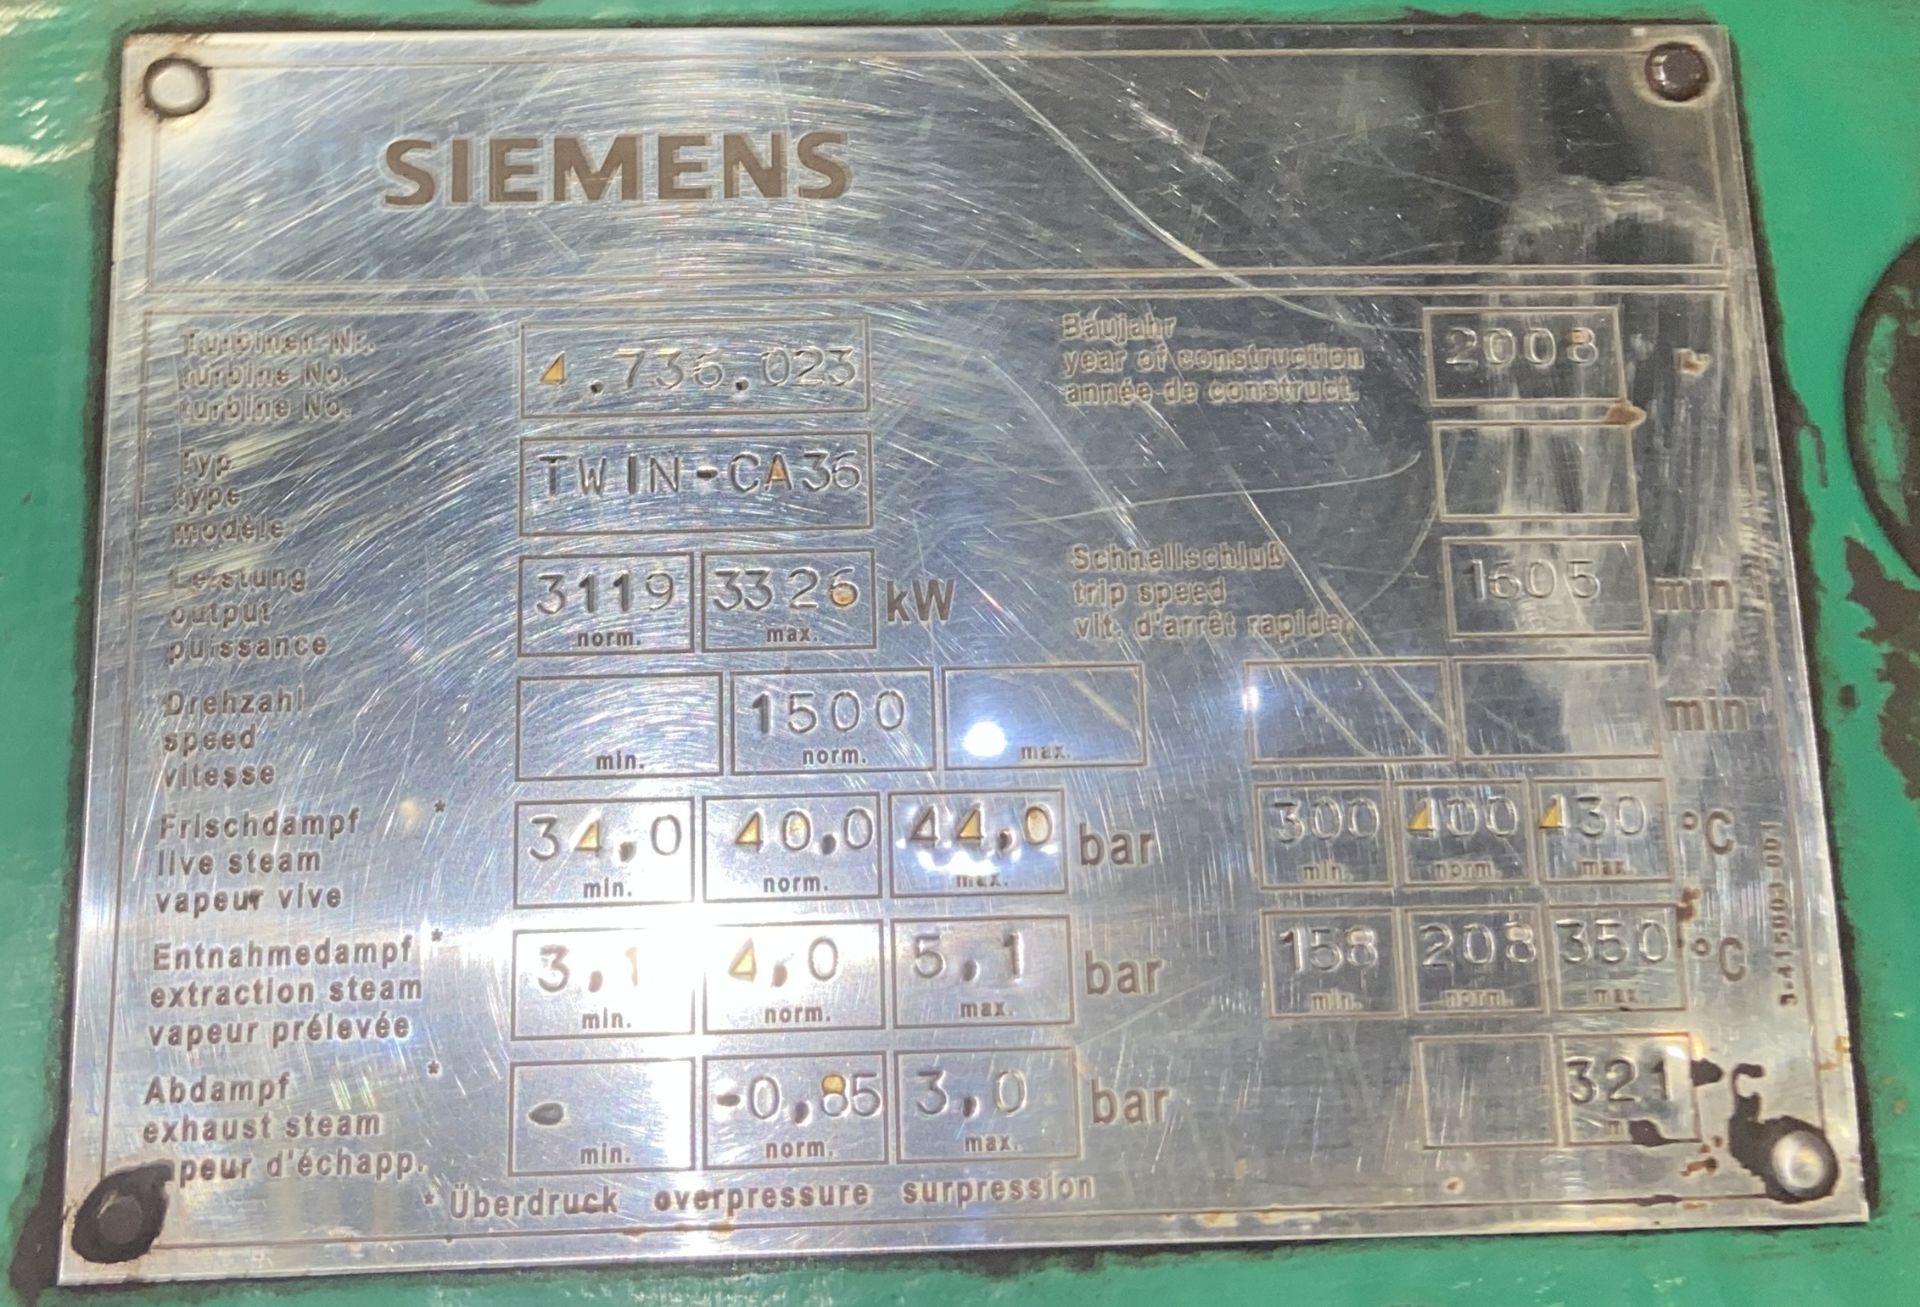 Siemens TWIN-CA36 STEAM TURBINE, serial no. 4.736.023, year of manufacture 2008, output 3119kW ( - Image 3 of 9